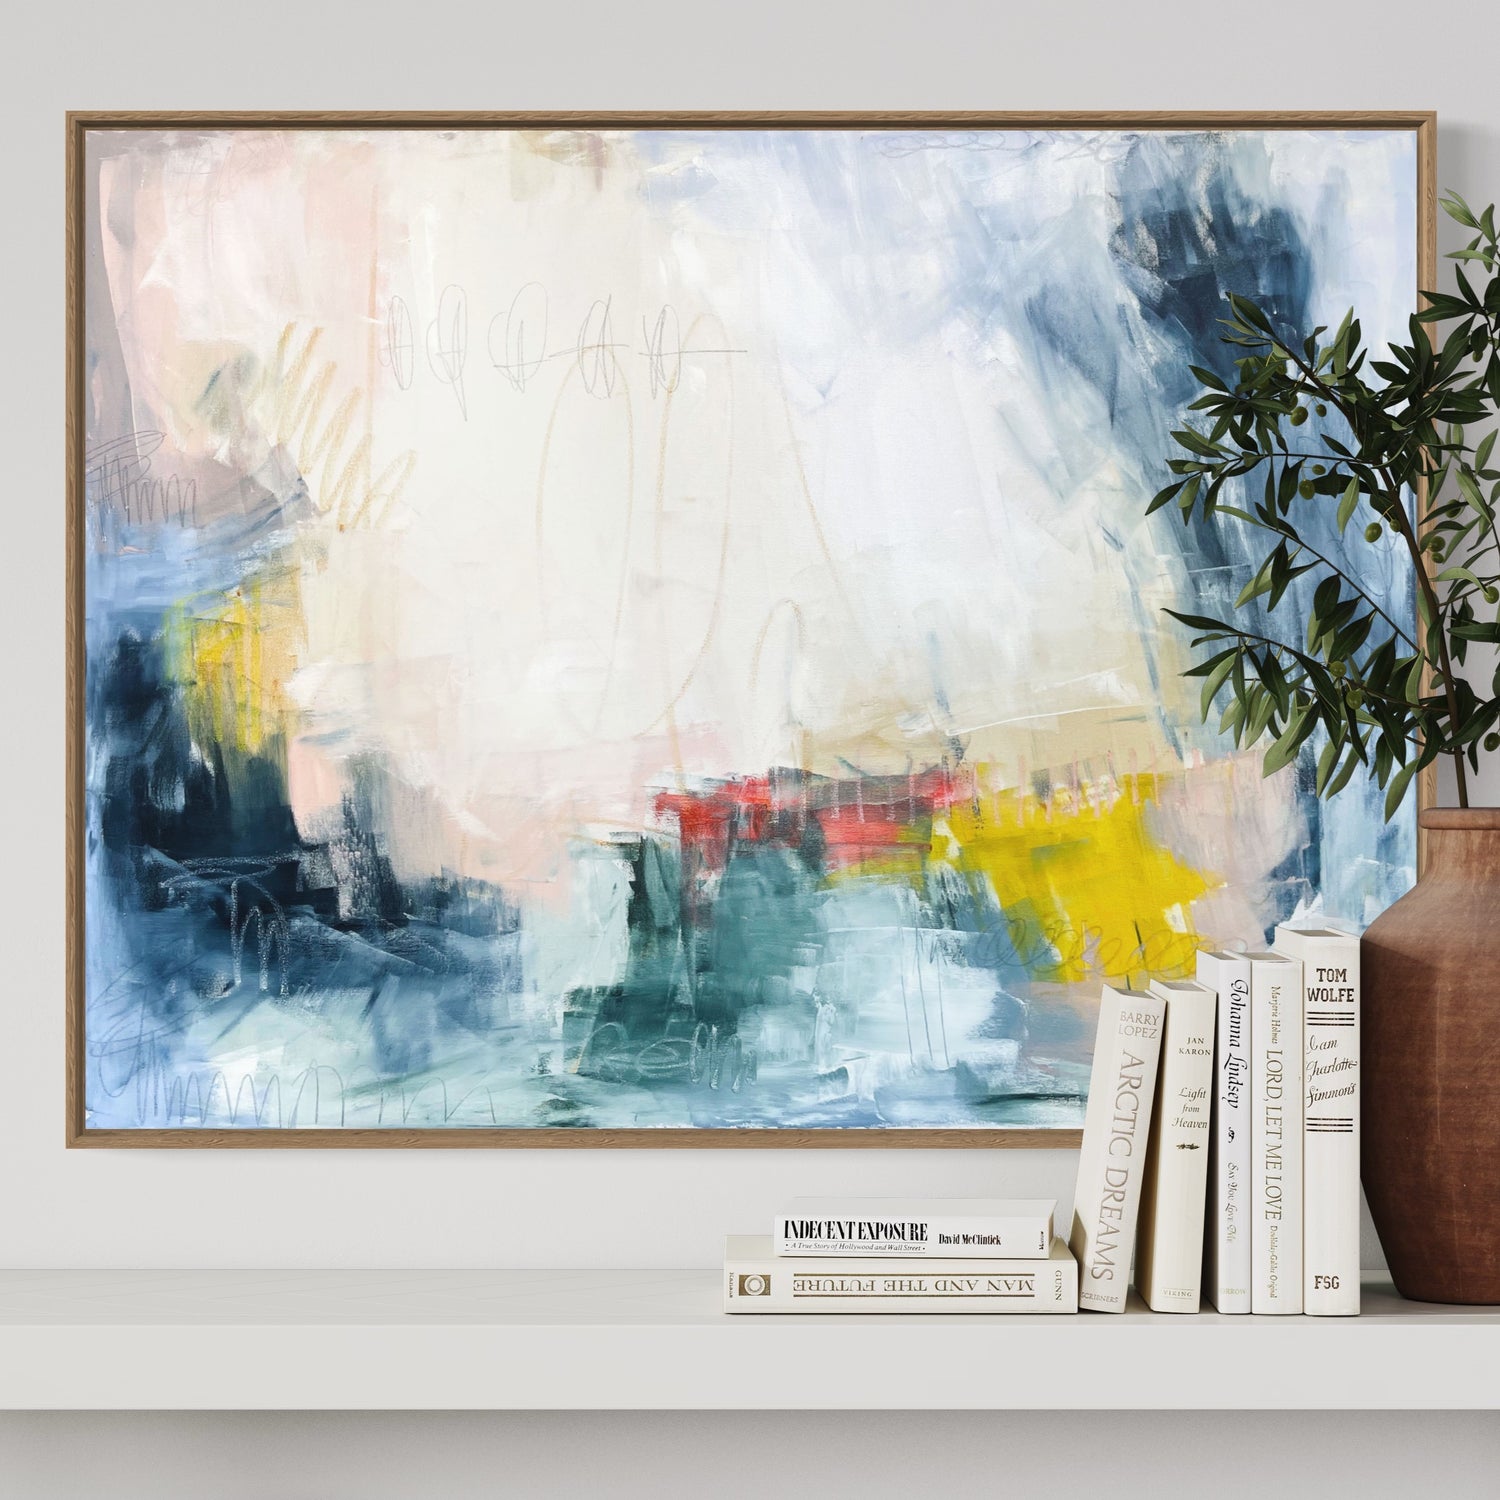 Want to see a painting in person before you buy?